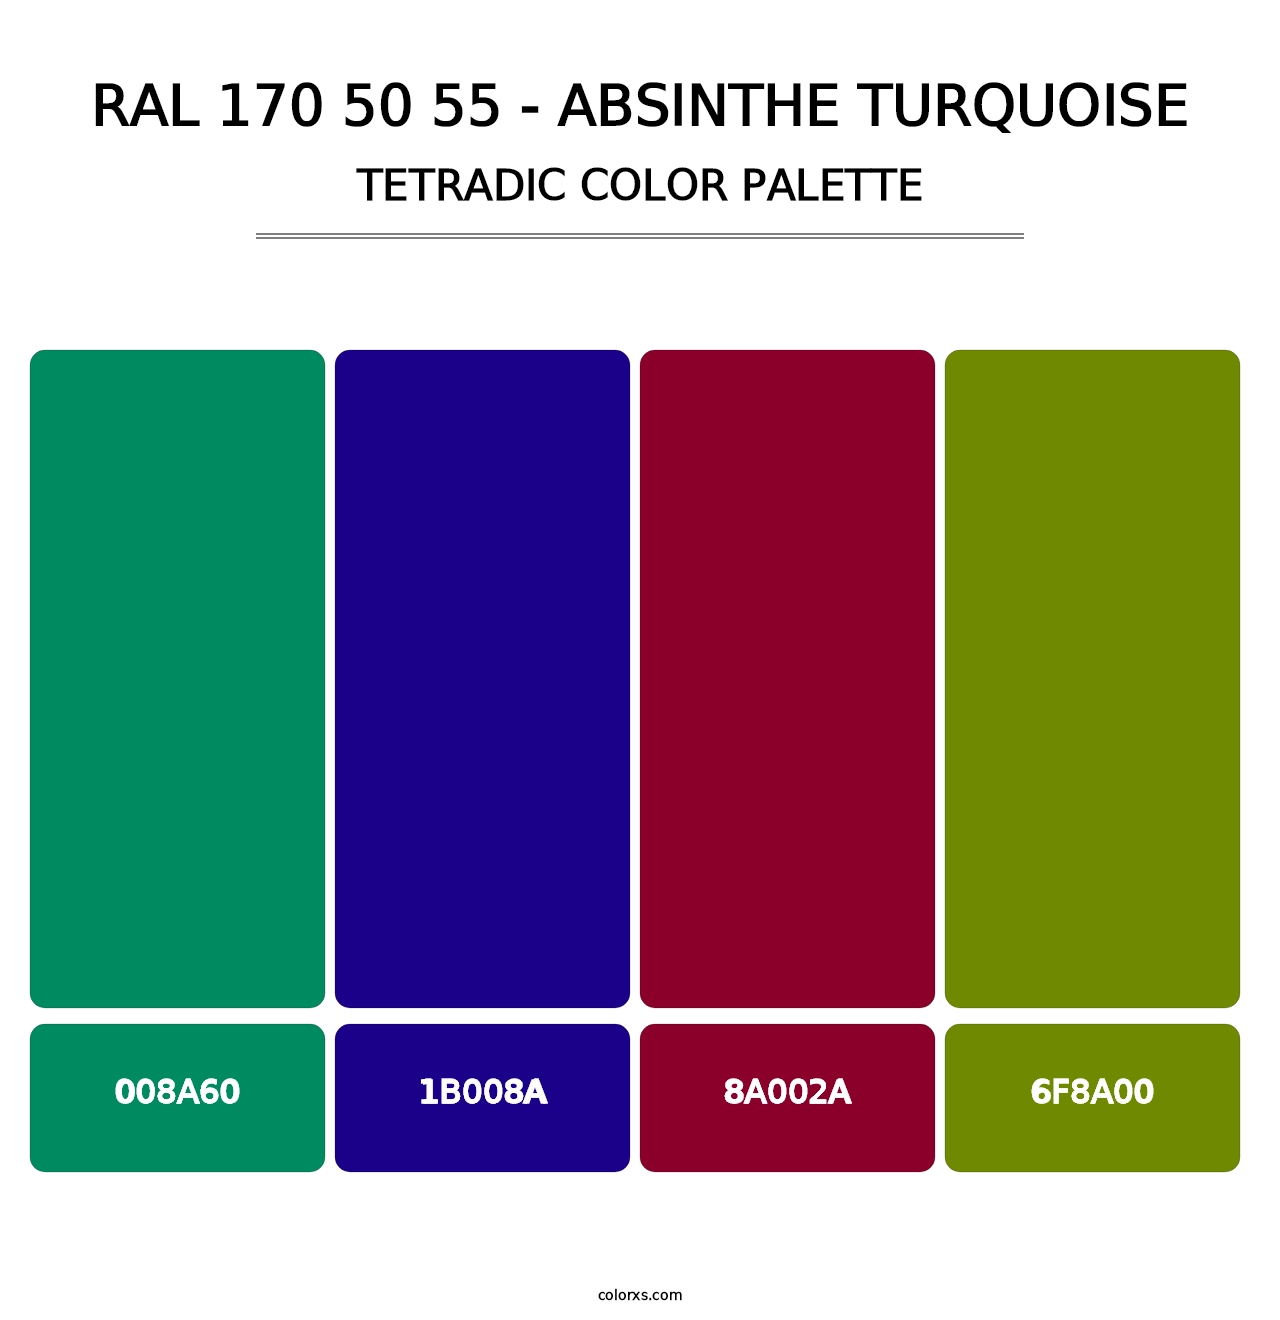 RAL 170 50 55 - Absinthe Turquoise - Tetradic Color Palette